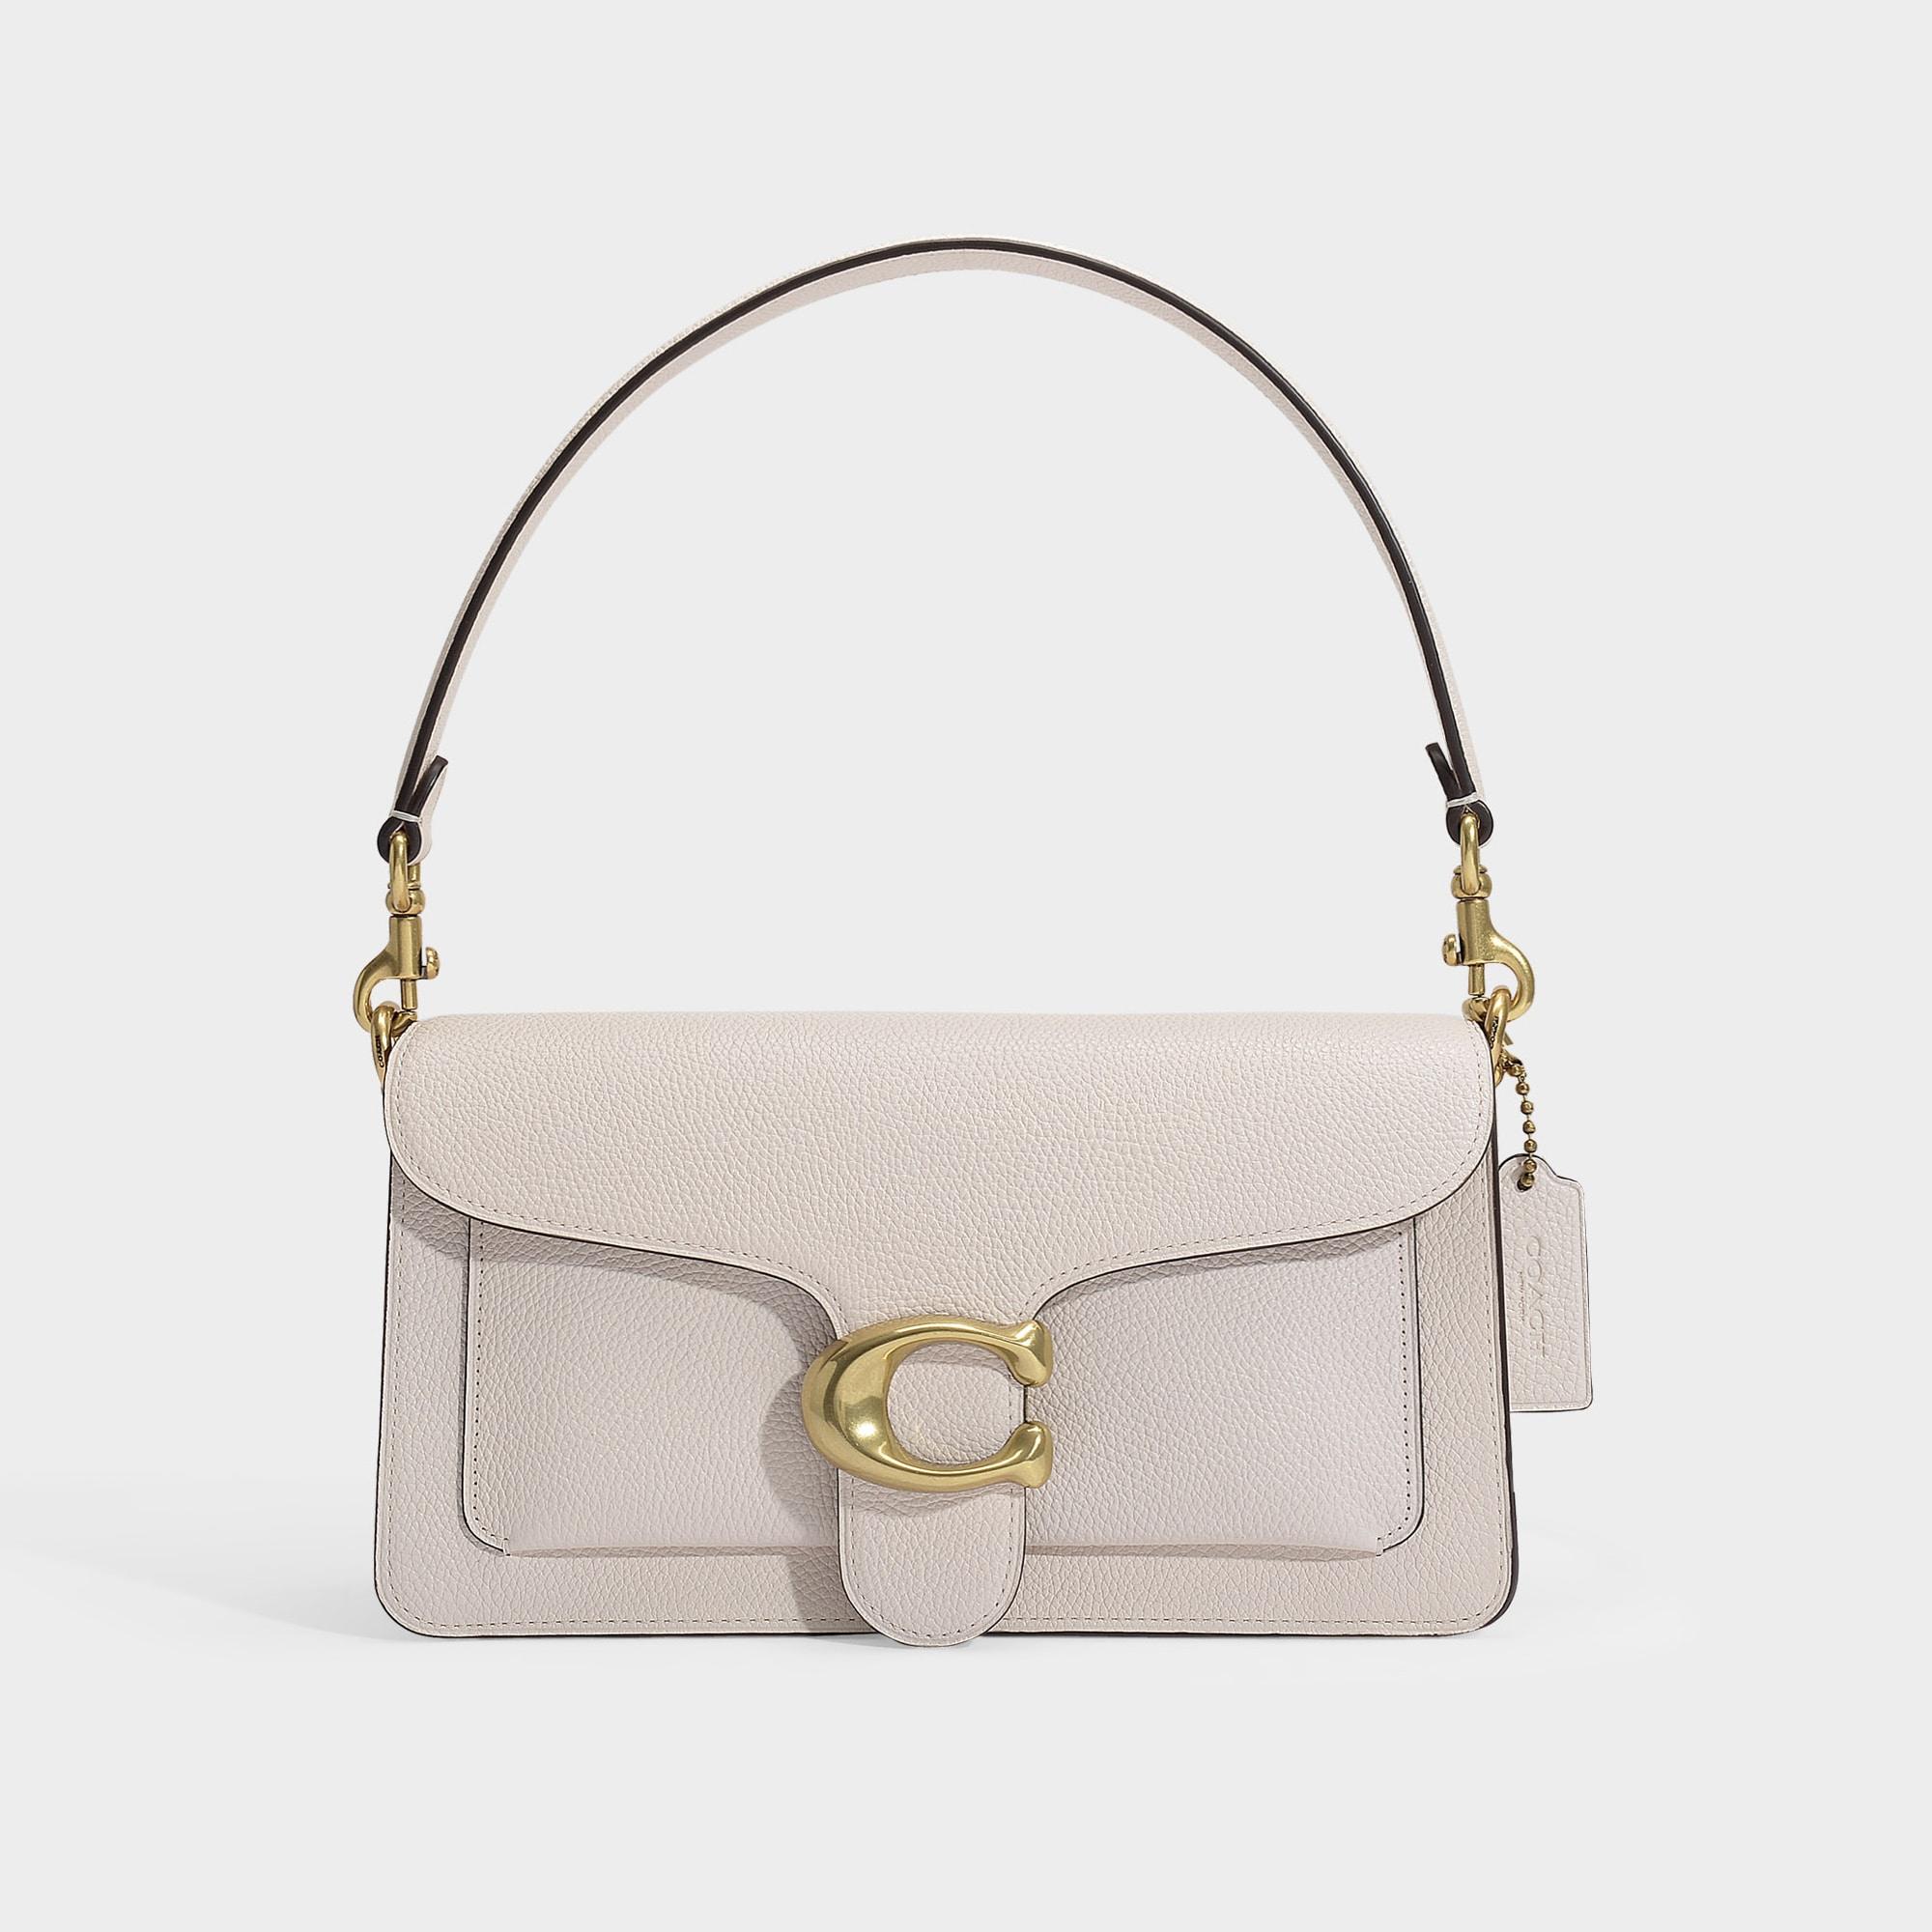 COACH Small Tabby Bag In White Polished Pebble Leather - Lyst